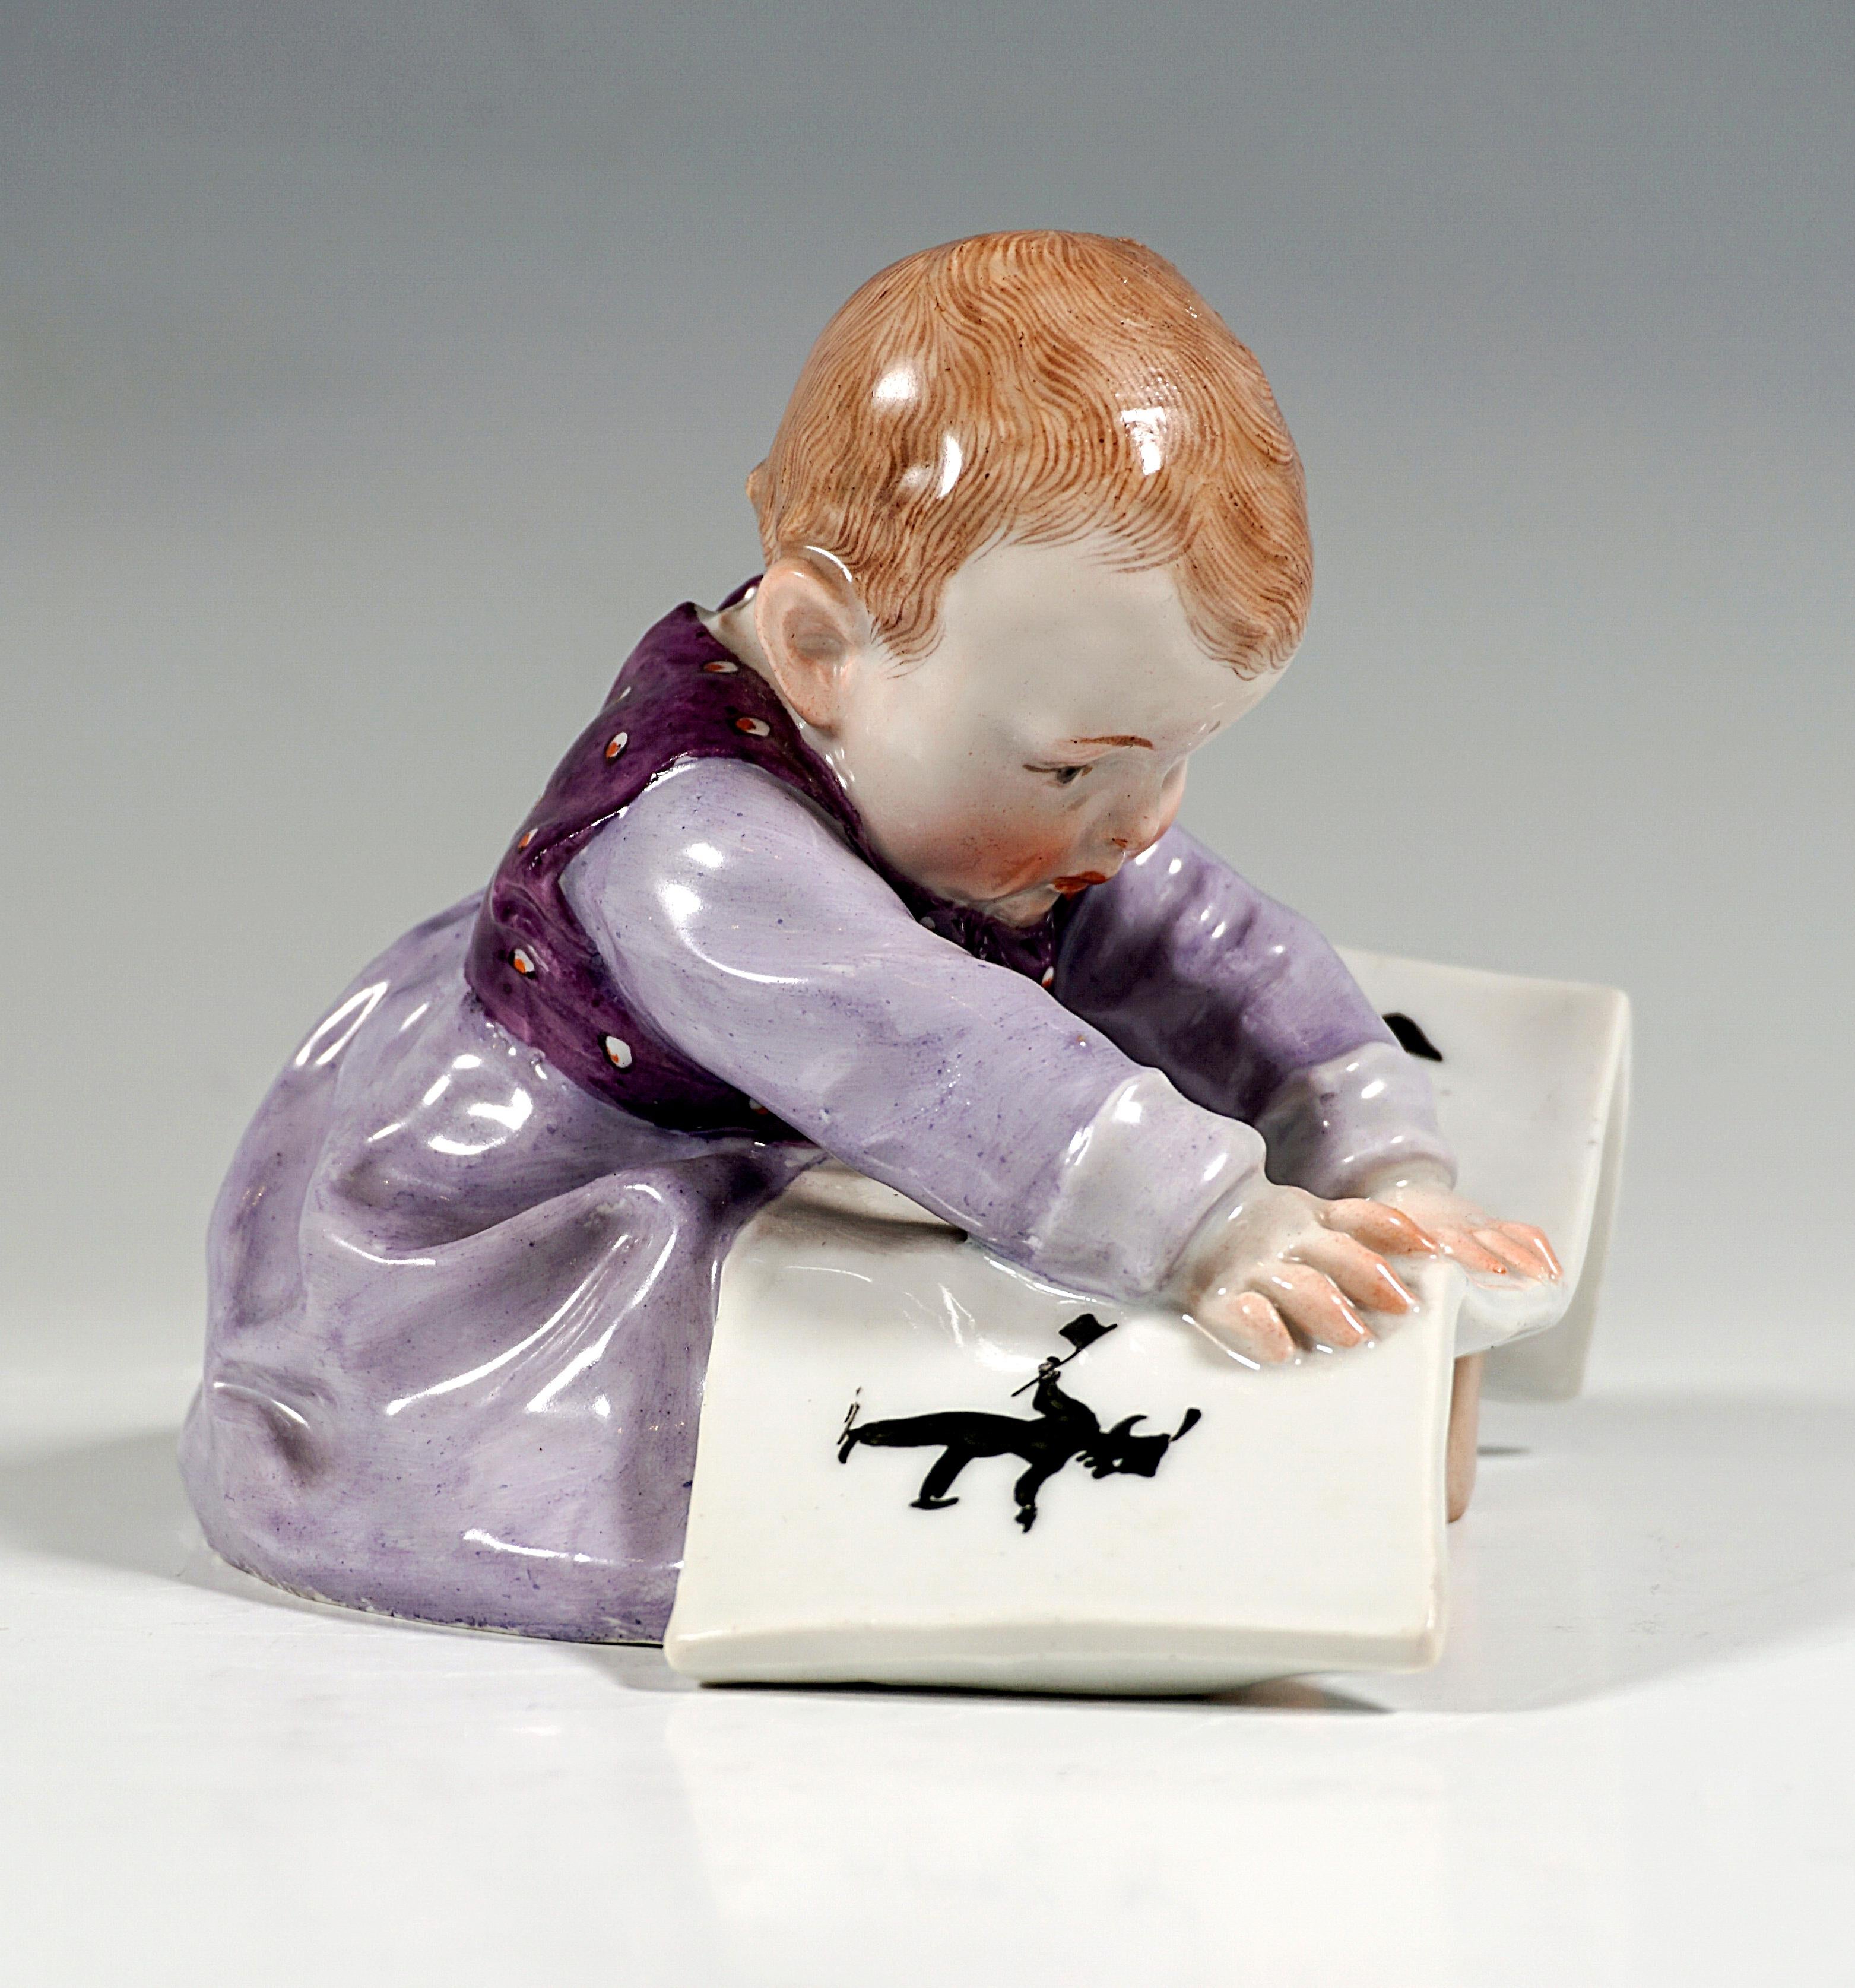 Art Nouveau Meissen porcelain figure from the time the model was created:
Baby in a dress with legs outstretched sitting on the floor and looking at a picture book.
Modeling of the finest quality, extremely loving and lifelike